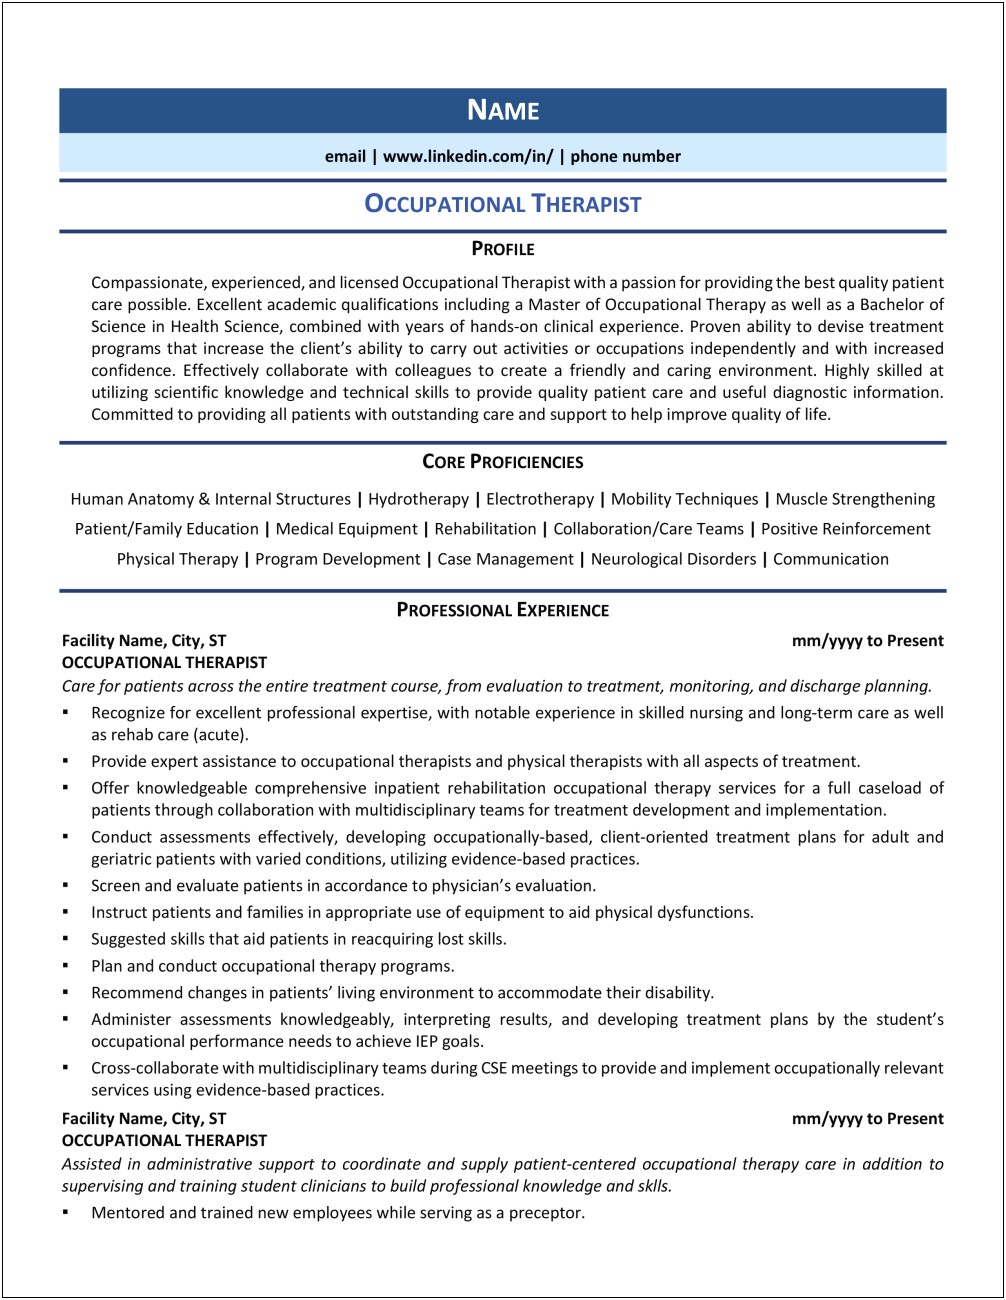 Sample Resume Of Occupational Therapist